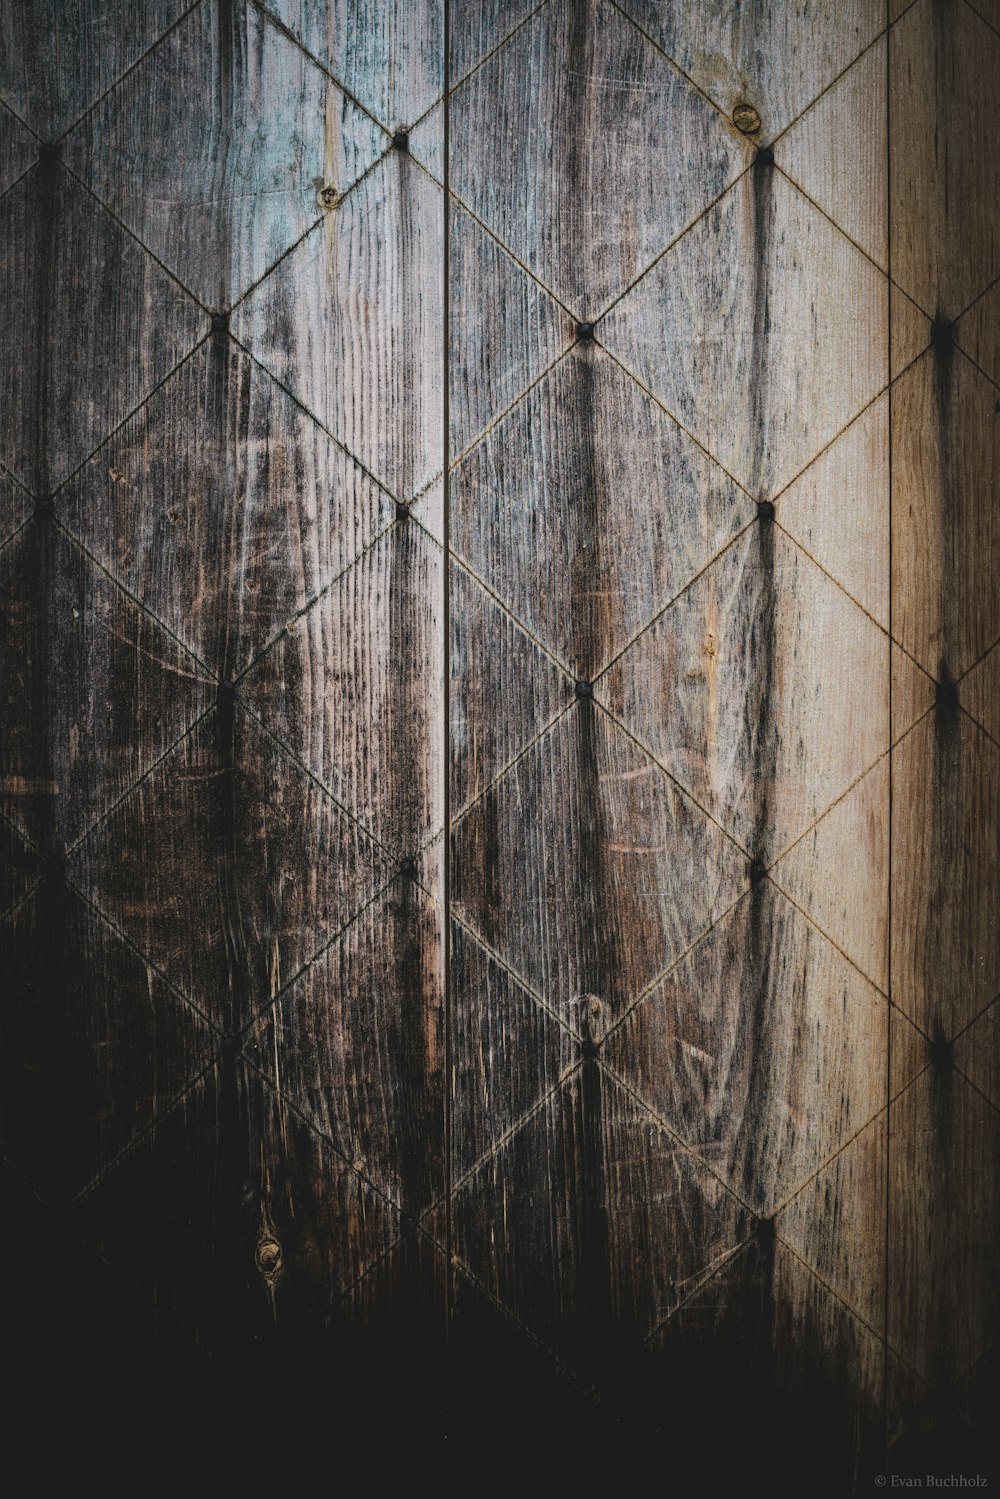 a close up of a wooden wall with knots